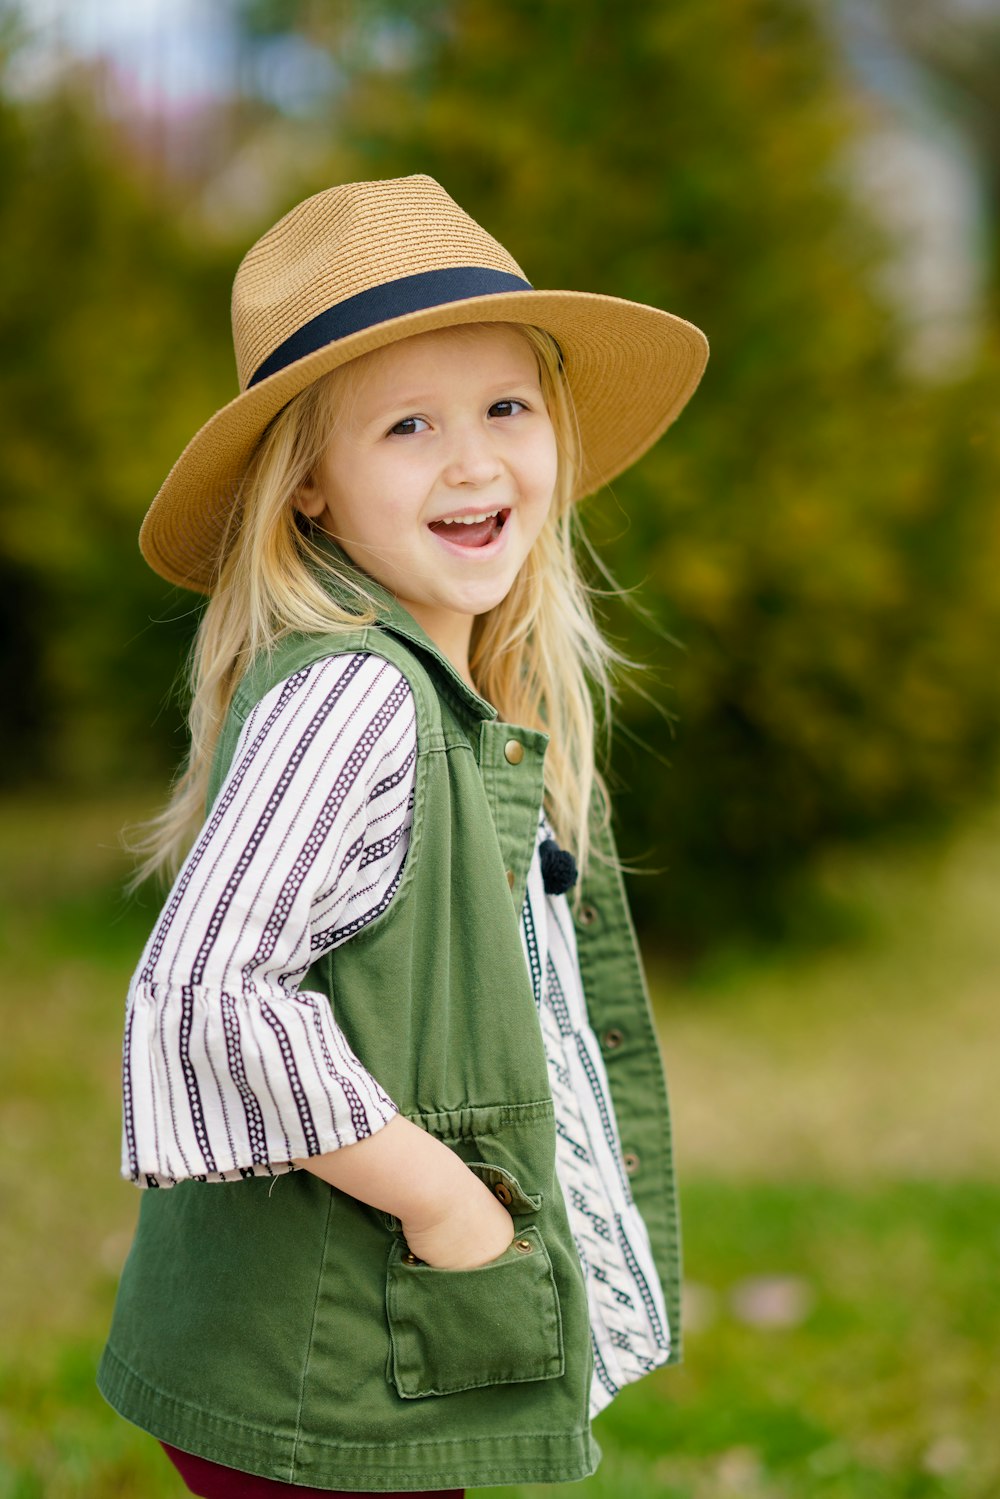 selective focus photography of girl smiling wearing sun hat